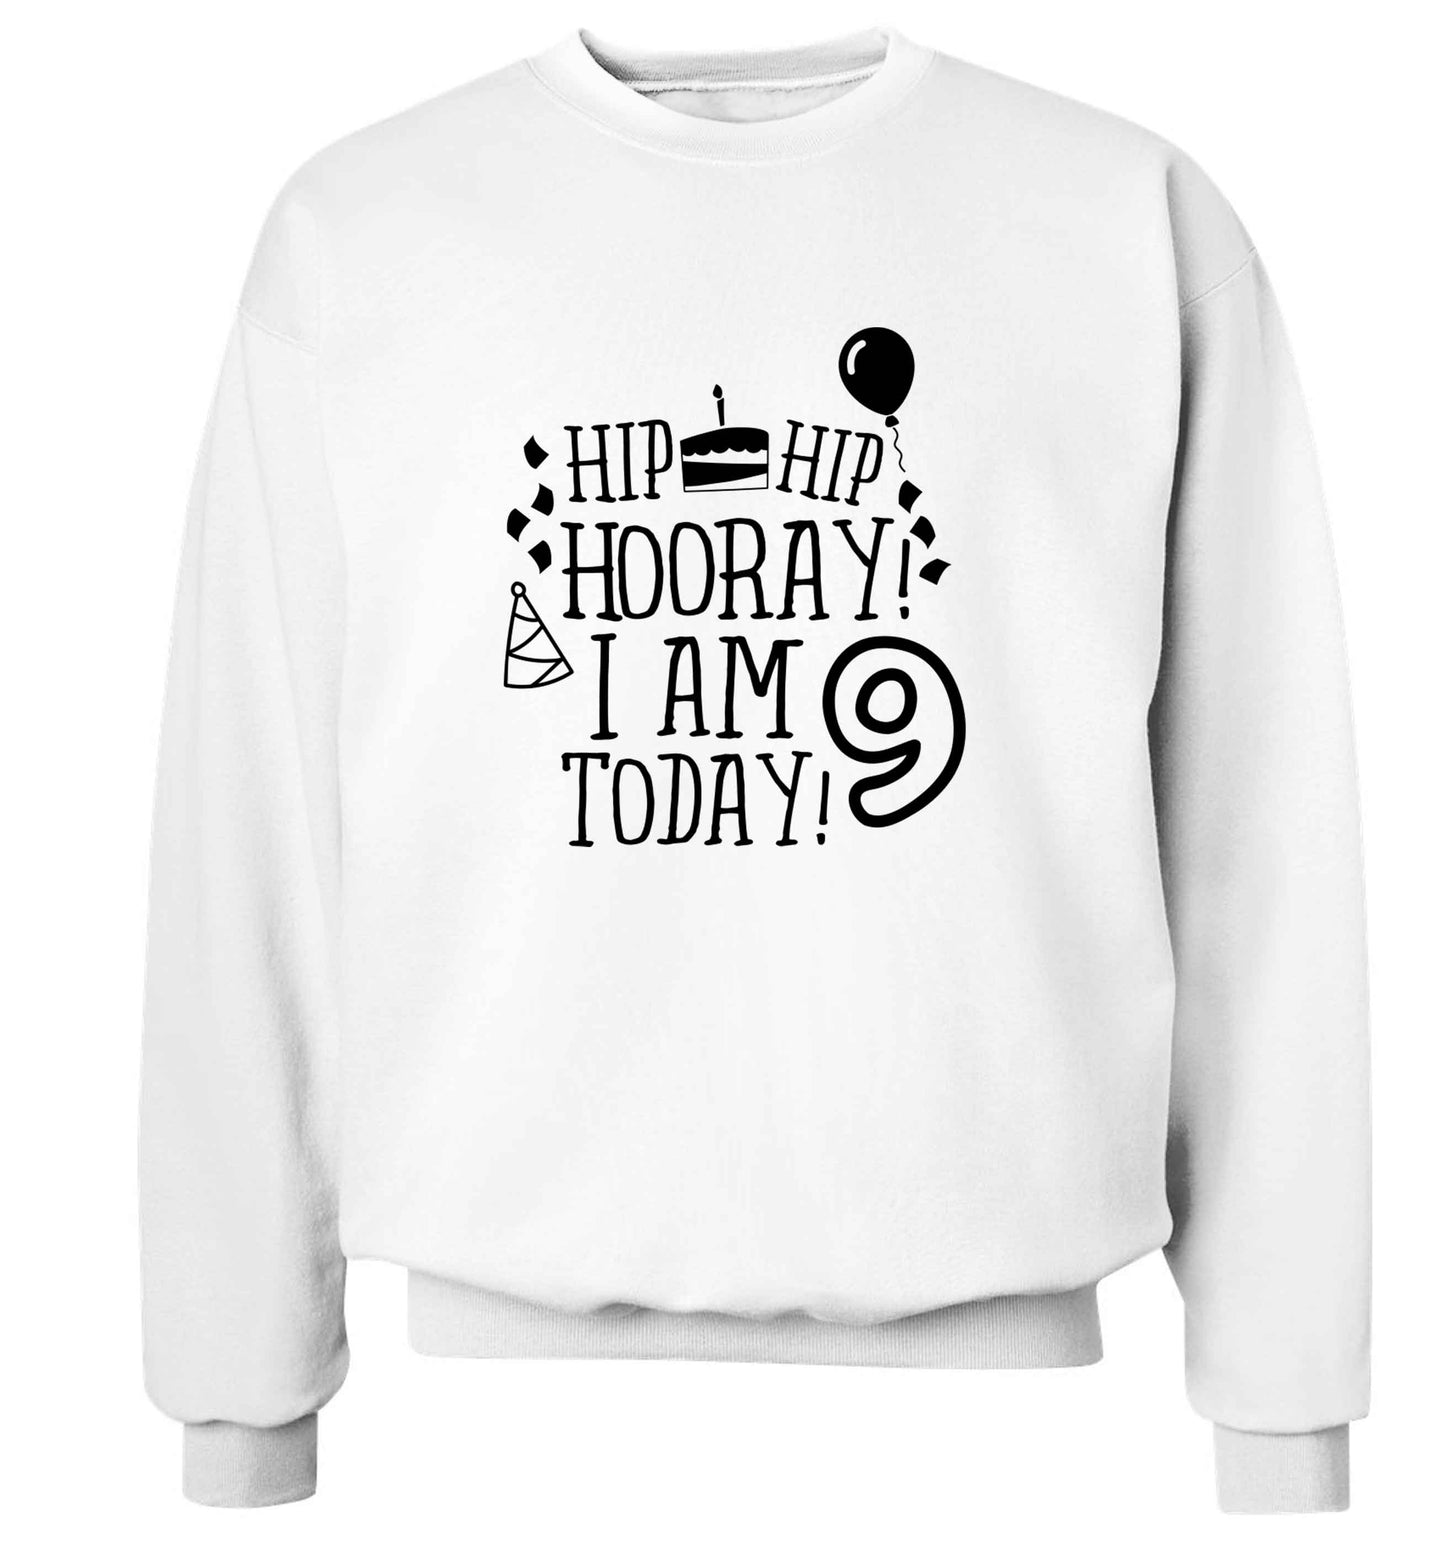 Hip hip hooray I am 9 today! adult's unisex white sweater 2XL